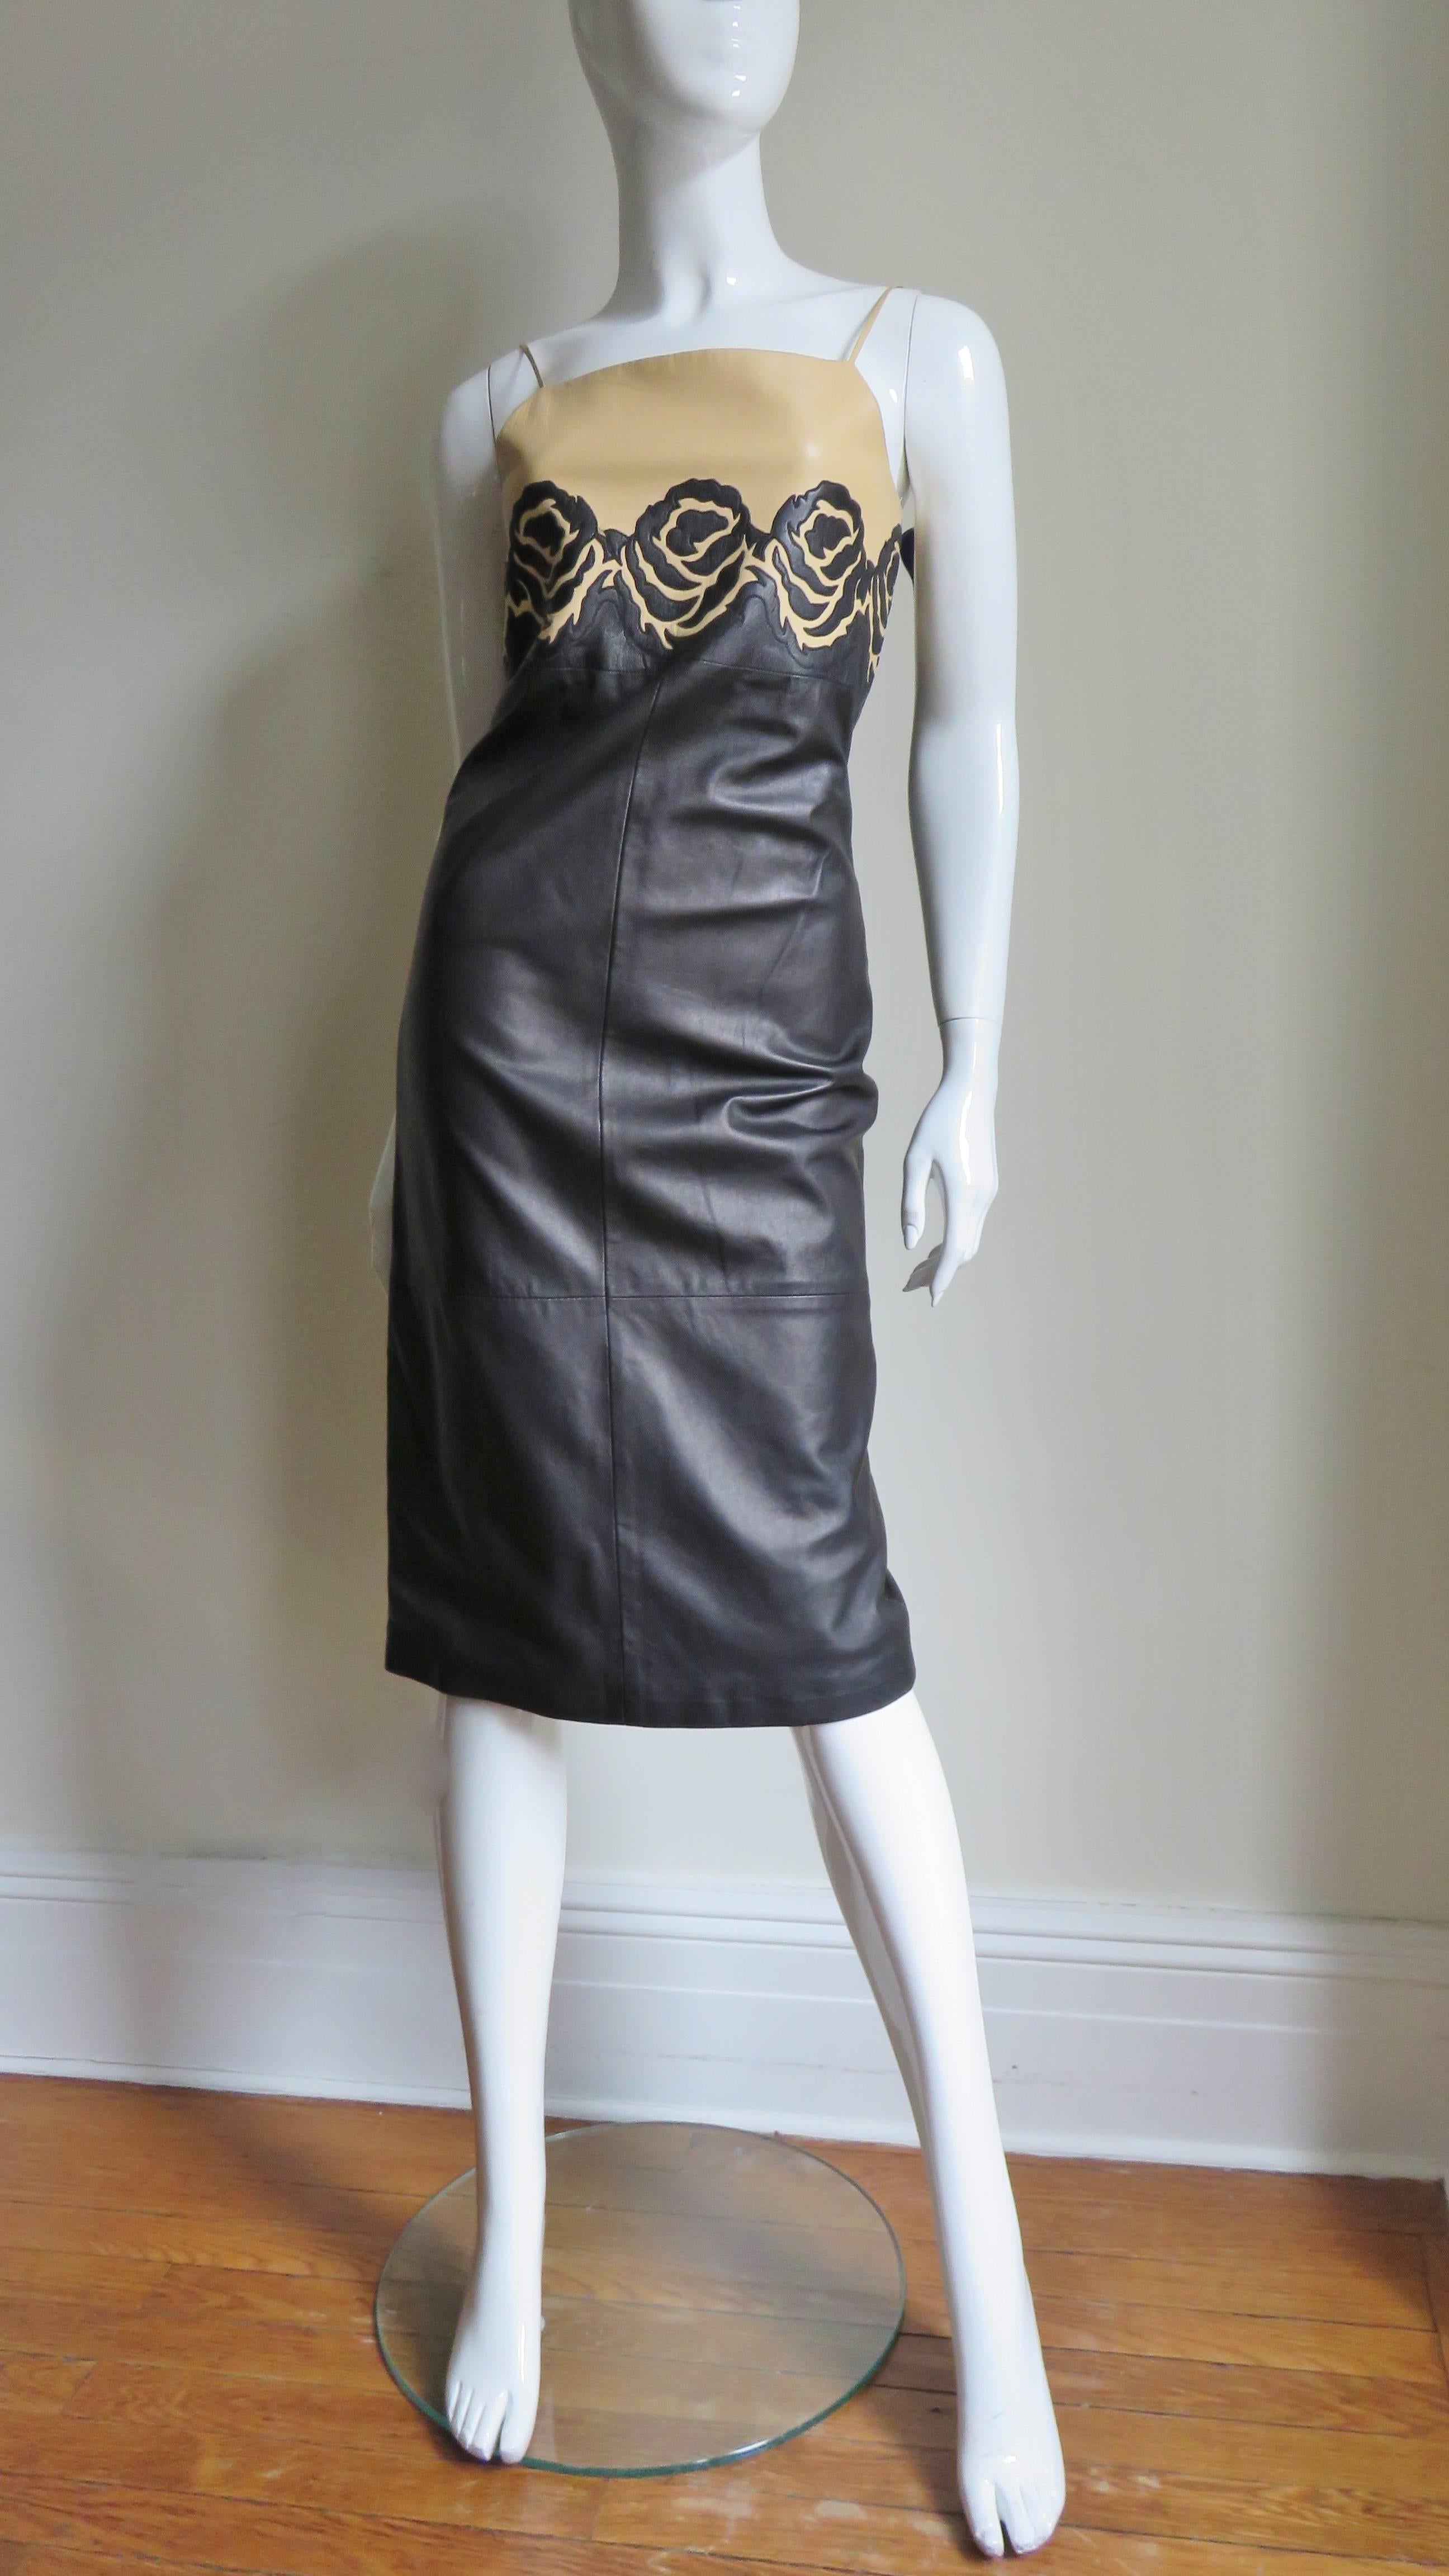  Gianni Versace Leather Color Block Dress with Applique Roses 1990s 3